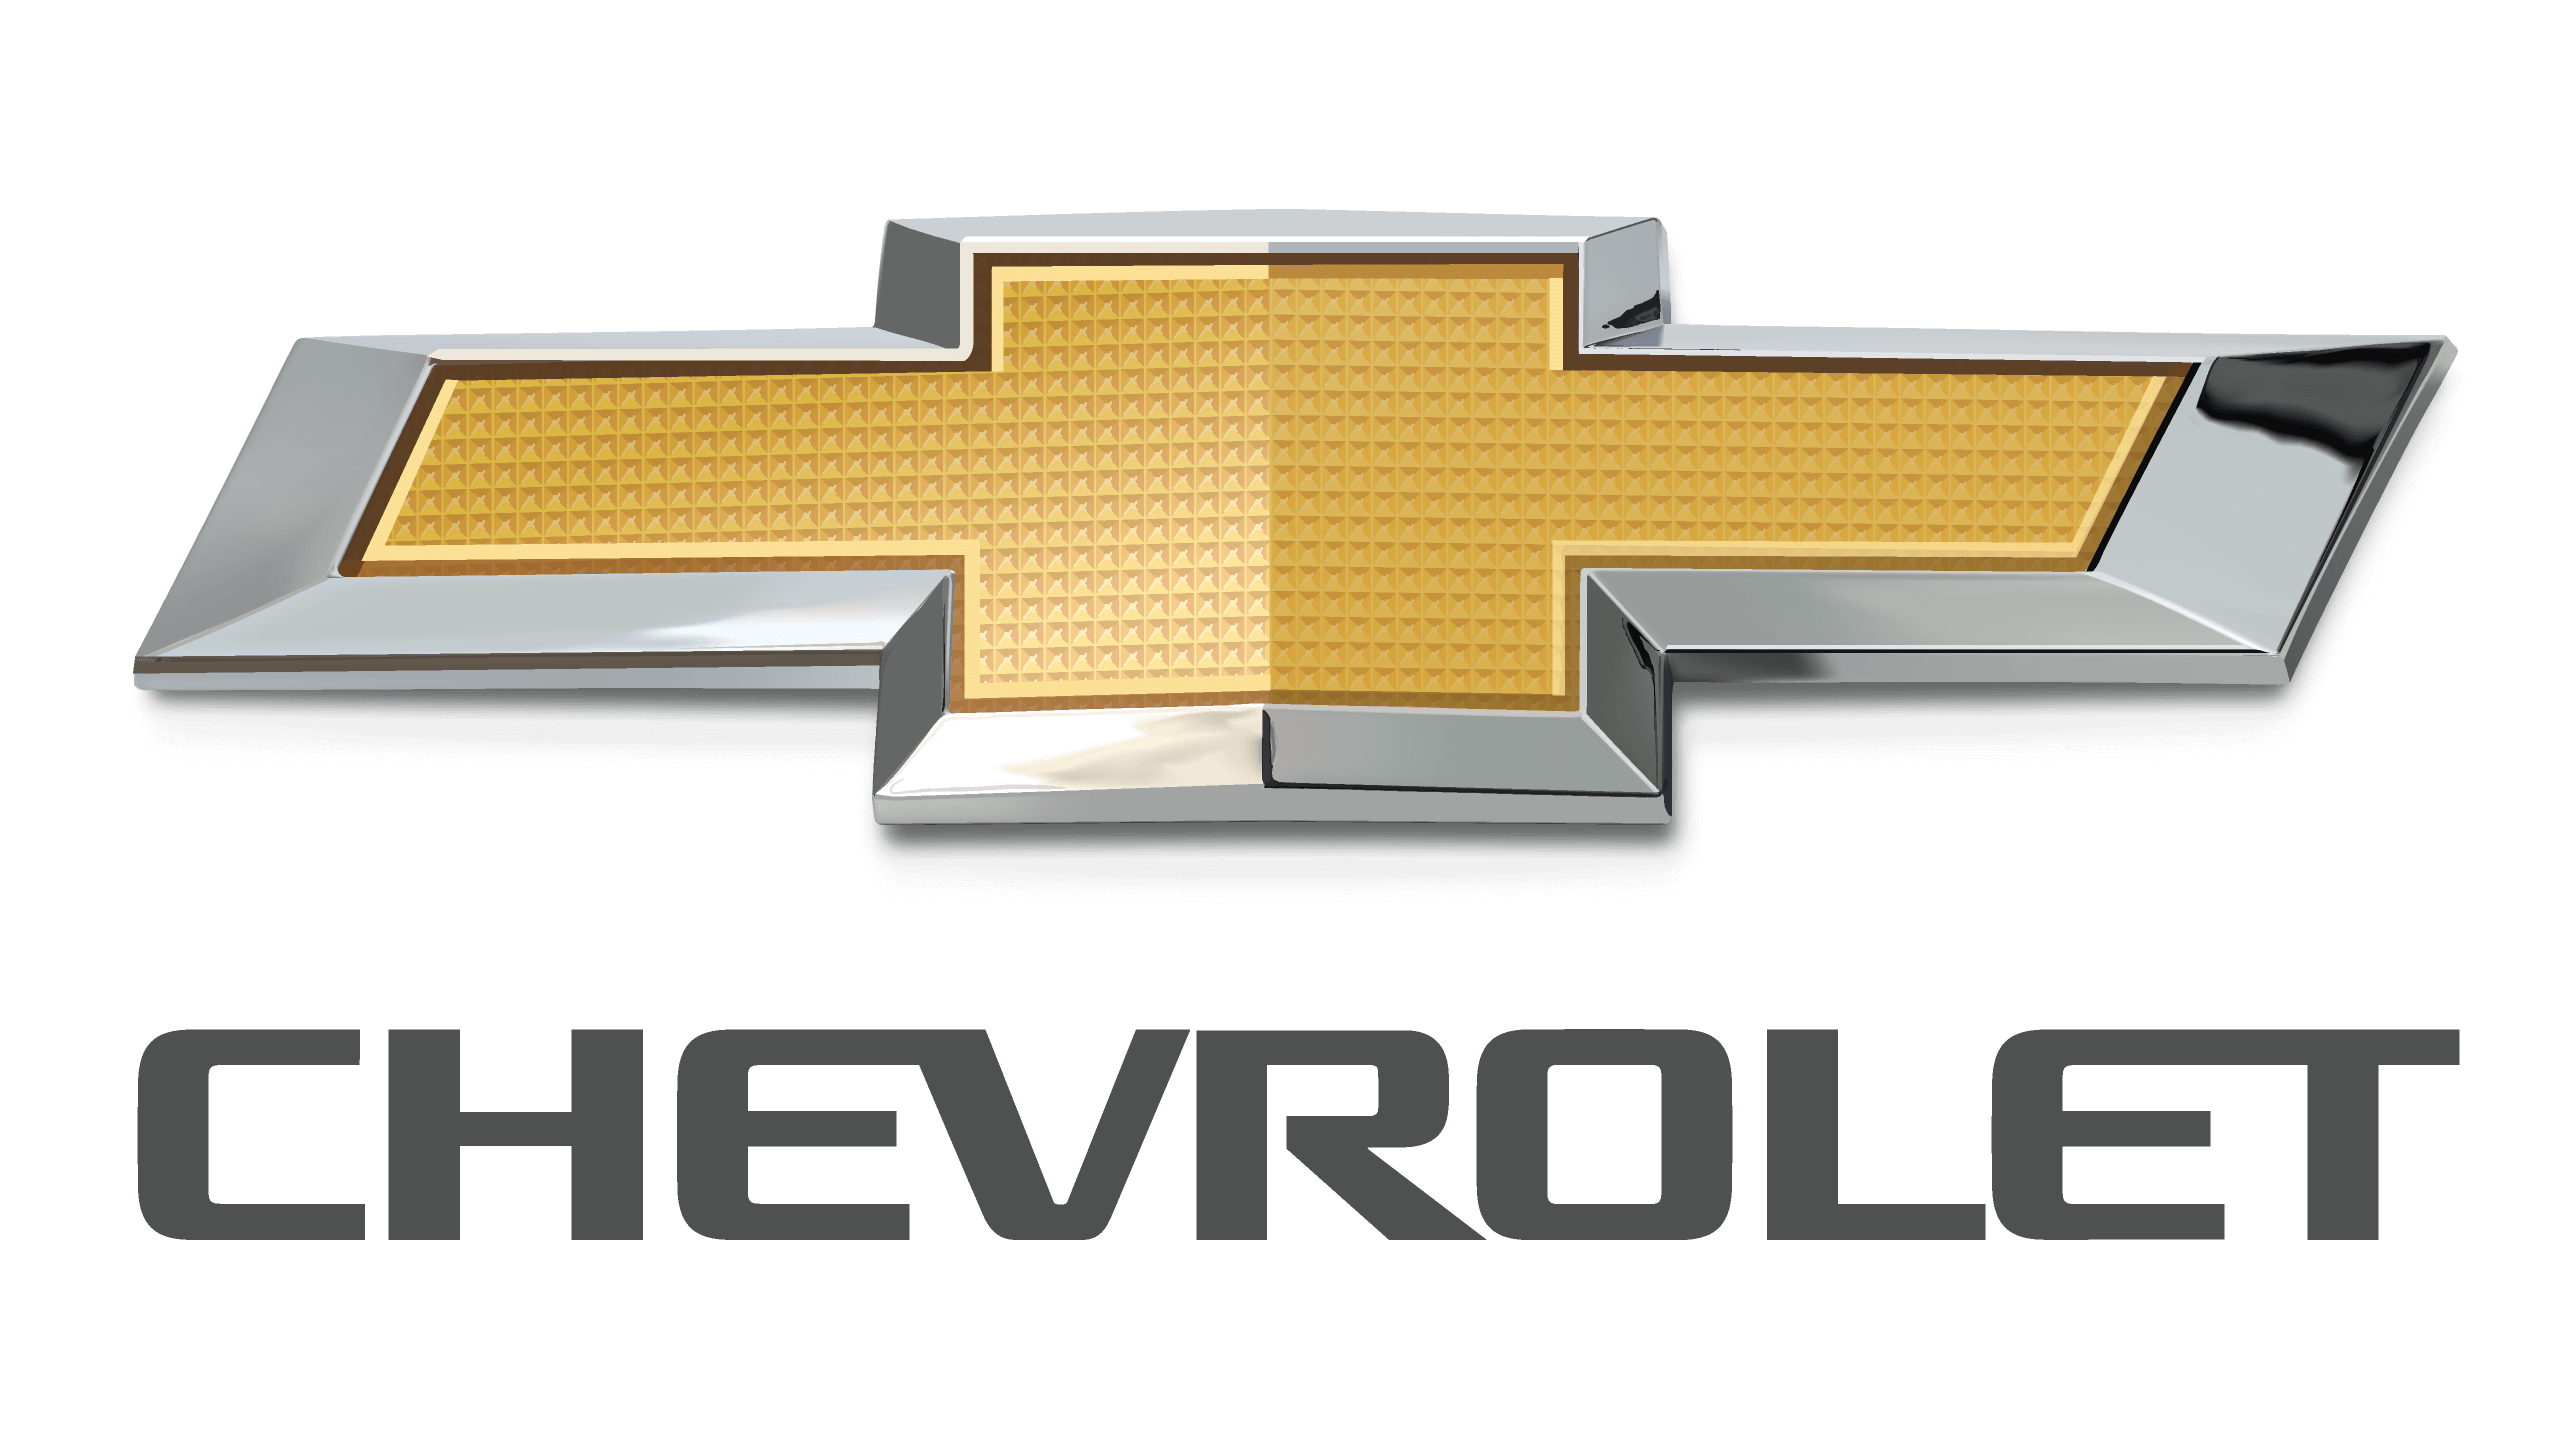 2021-2022 Chevy Tahoe SSV & PPV, 2015-2019 Chevy Silverado 2500 And 3500 And 2014-2018 Silverado 1500 With OEM Center Seat And 2019 Silverado 1500 LD